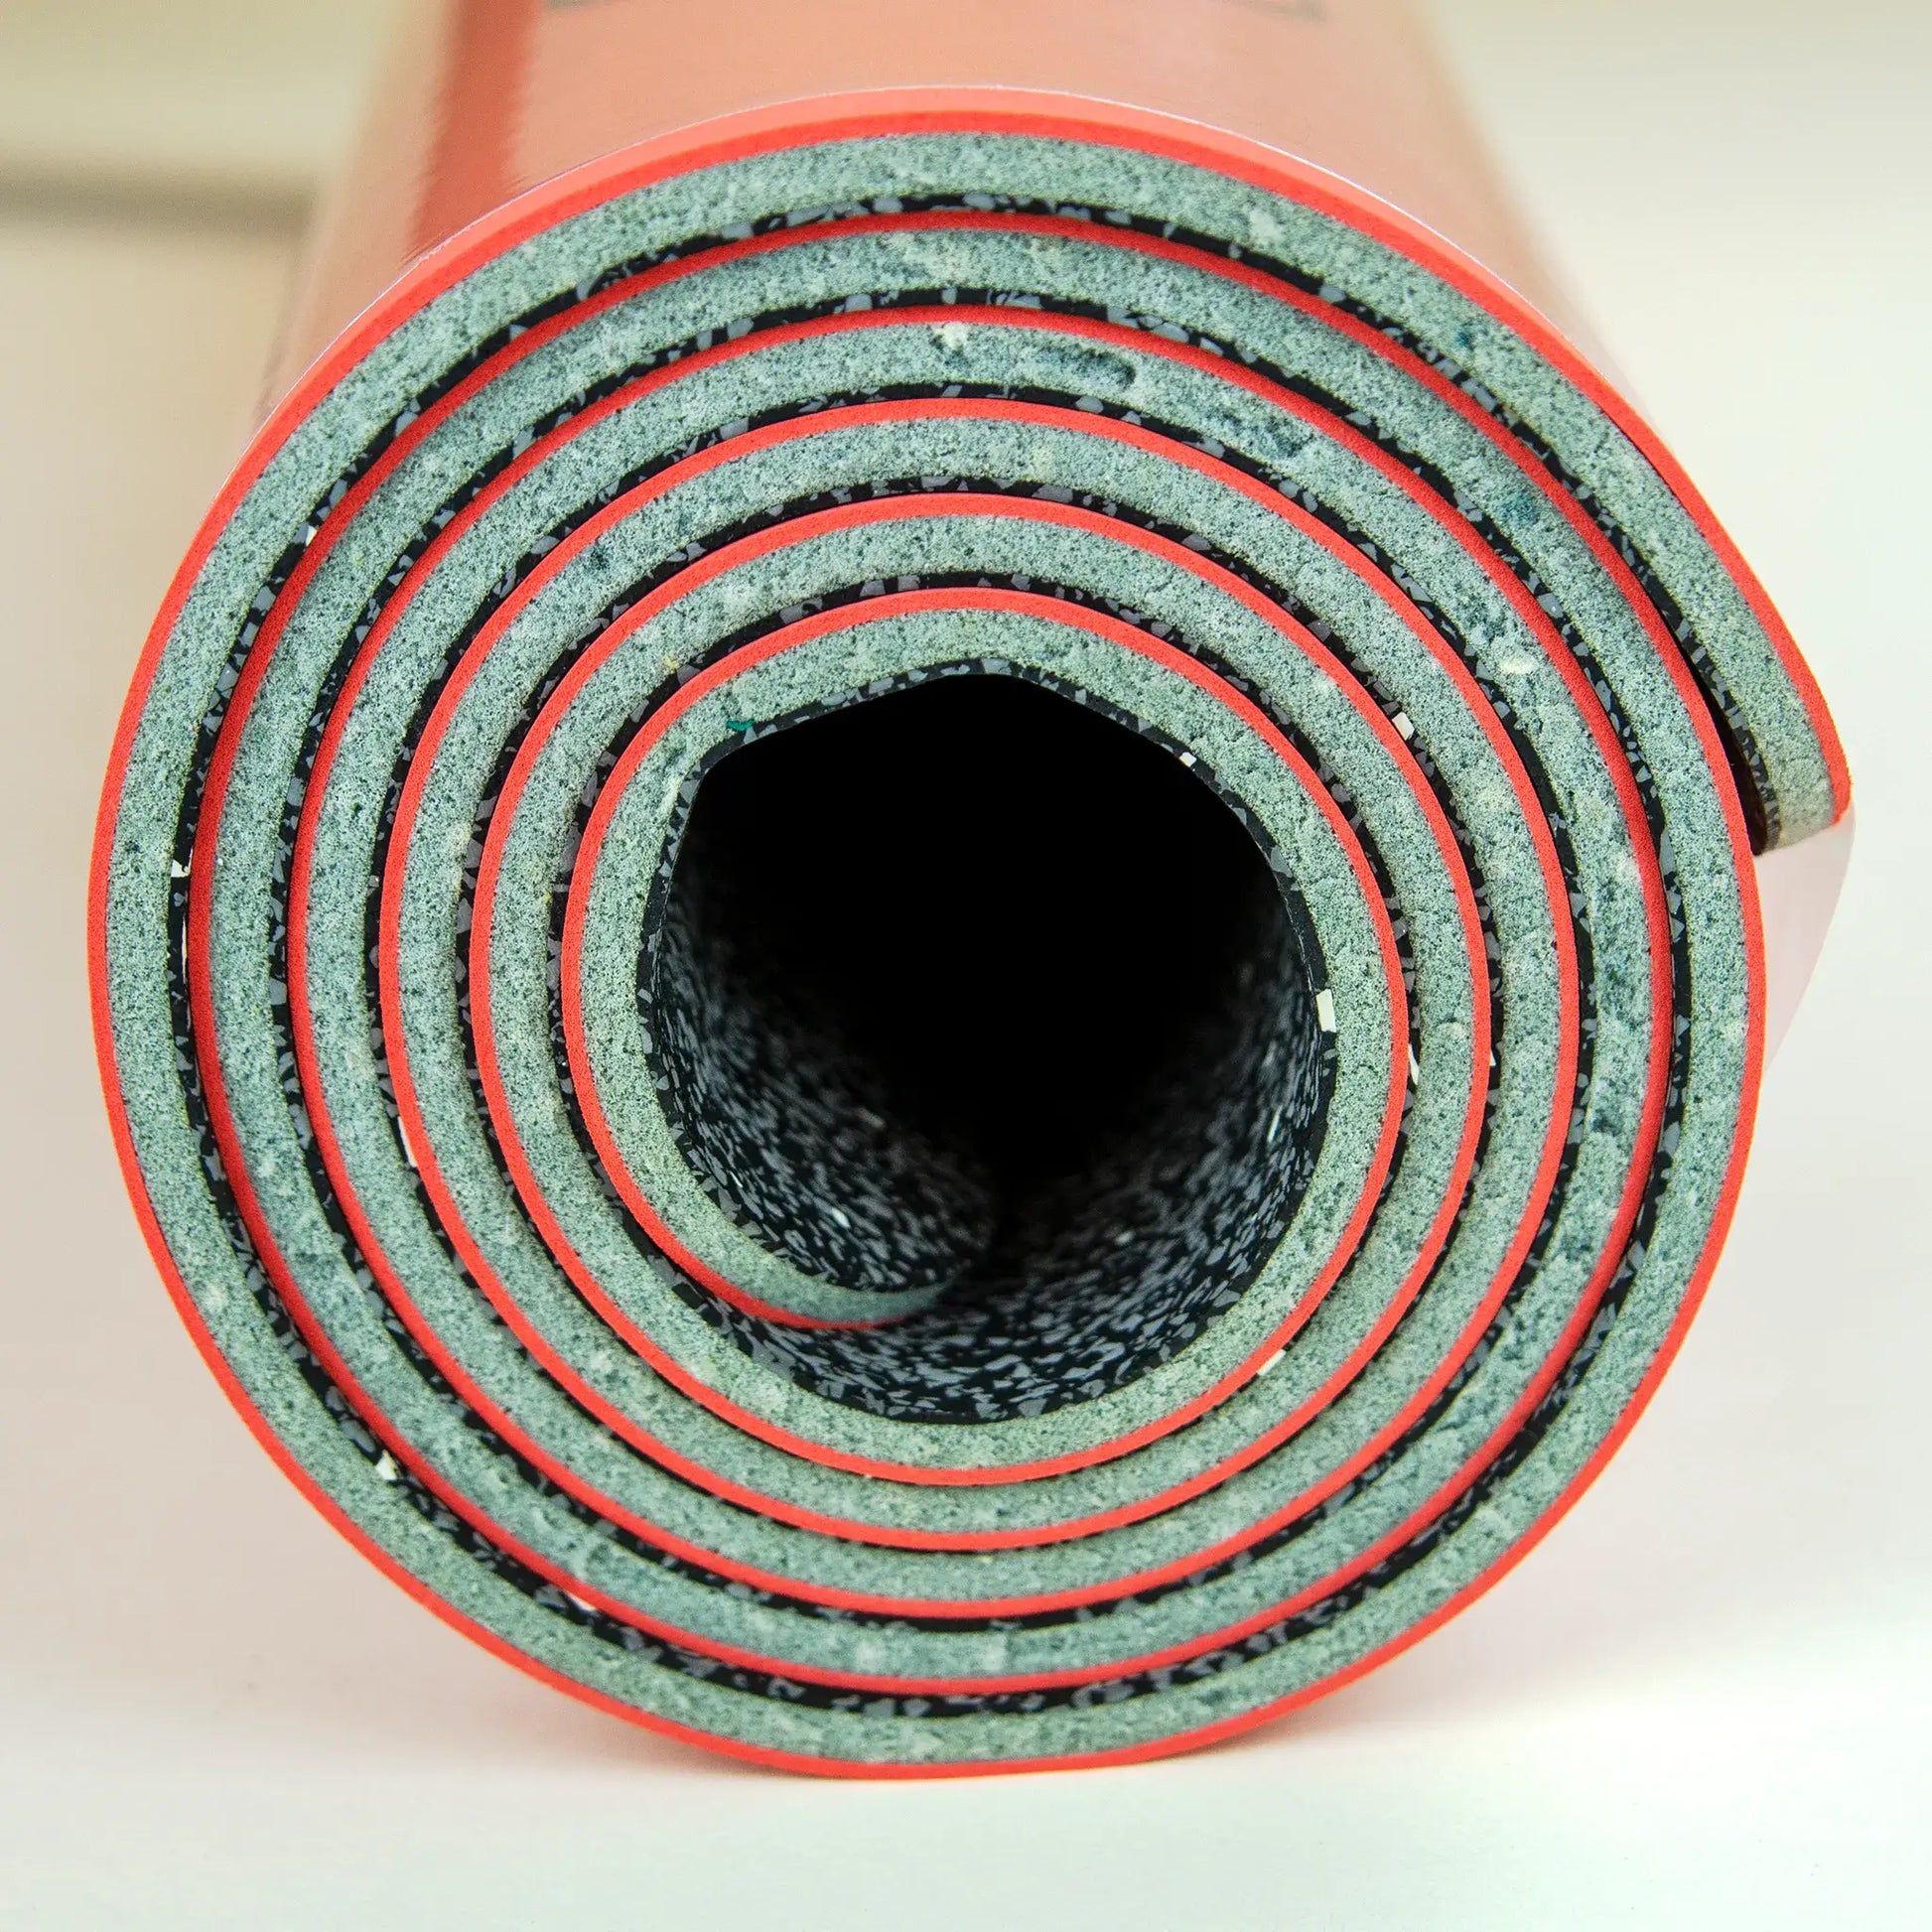 Side profile of a rolled up red yoga mat.